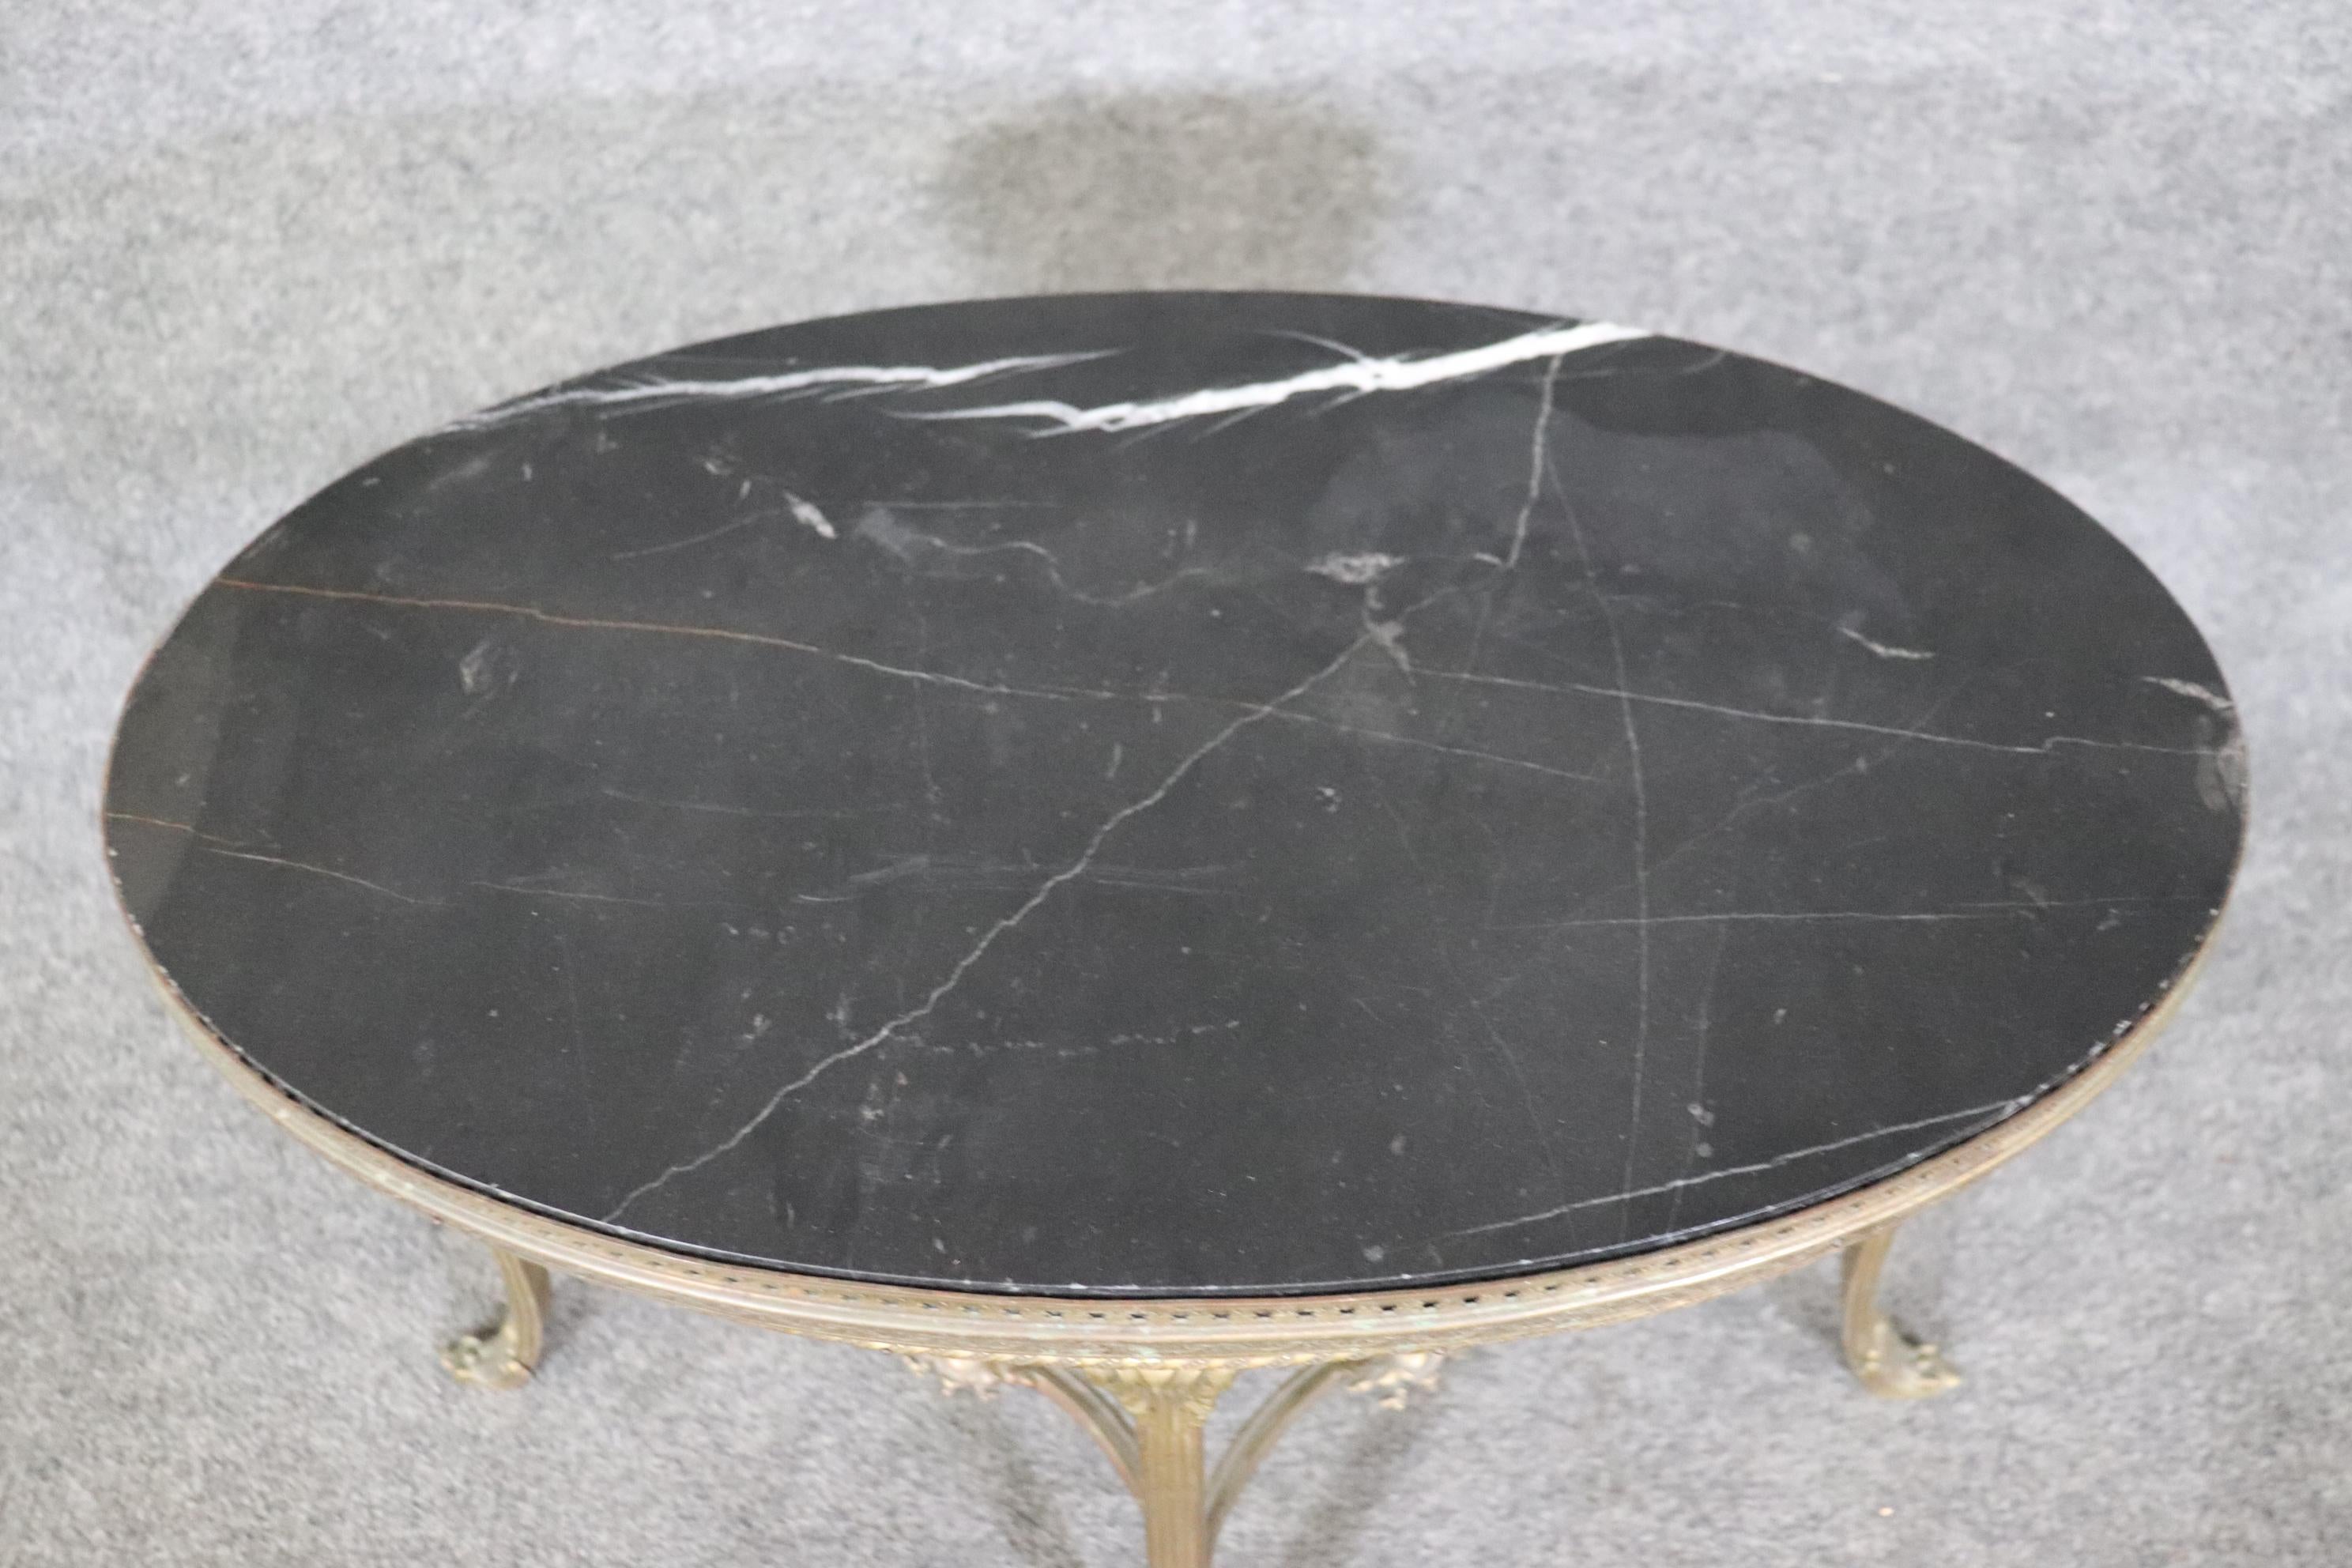 This is a superbly crafted coffee table of a relatively smaller scale but made of extremely durable cast brass or maybe bronze and a gorgeous black marble top. The table is in good antique condition and will show signs of age such as verdigris